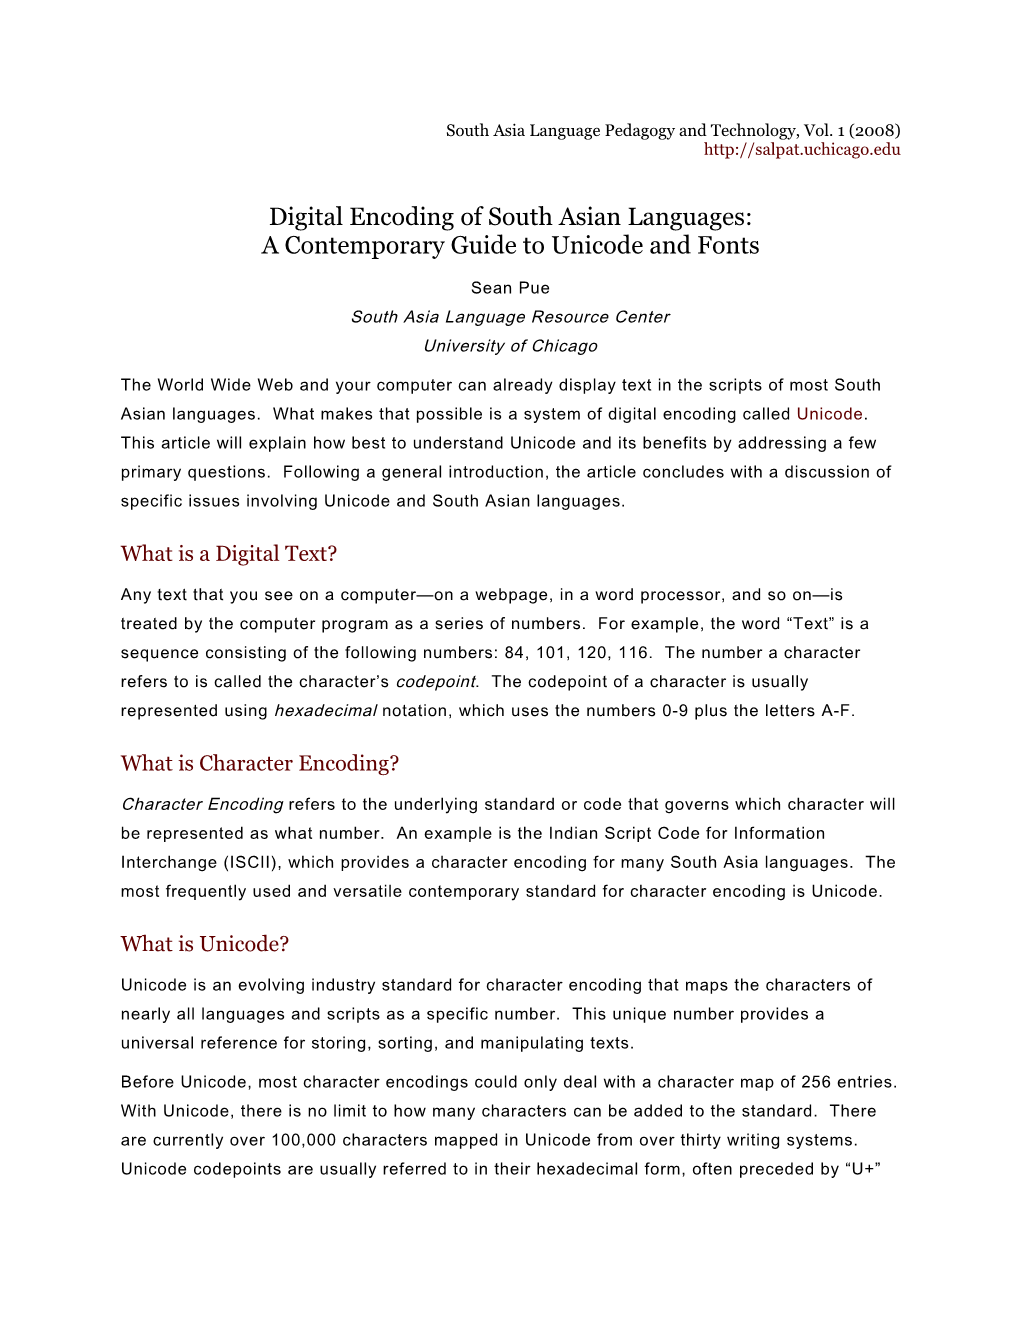 Digital Encoding of South Asian Languages: a Contemporary Guide to Unicode and Fonts